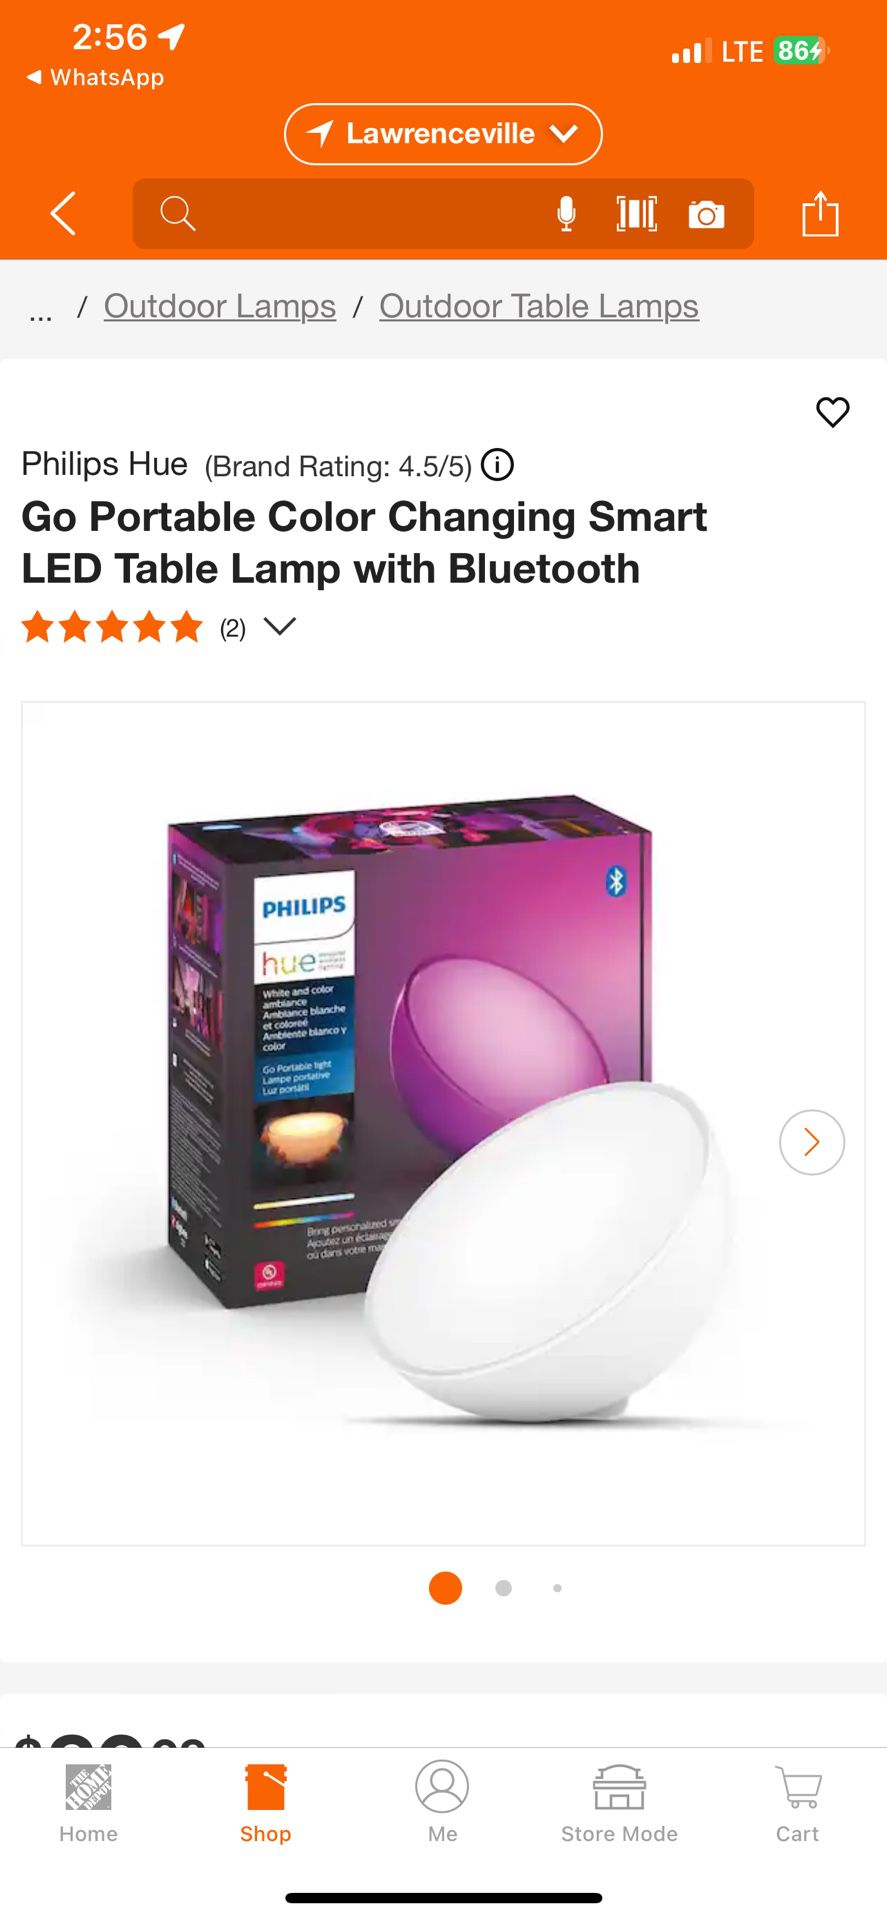 Go Portable Color Changing Smart LED Table Lamp with Bluetooth